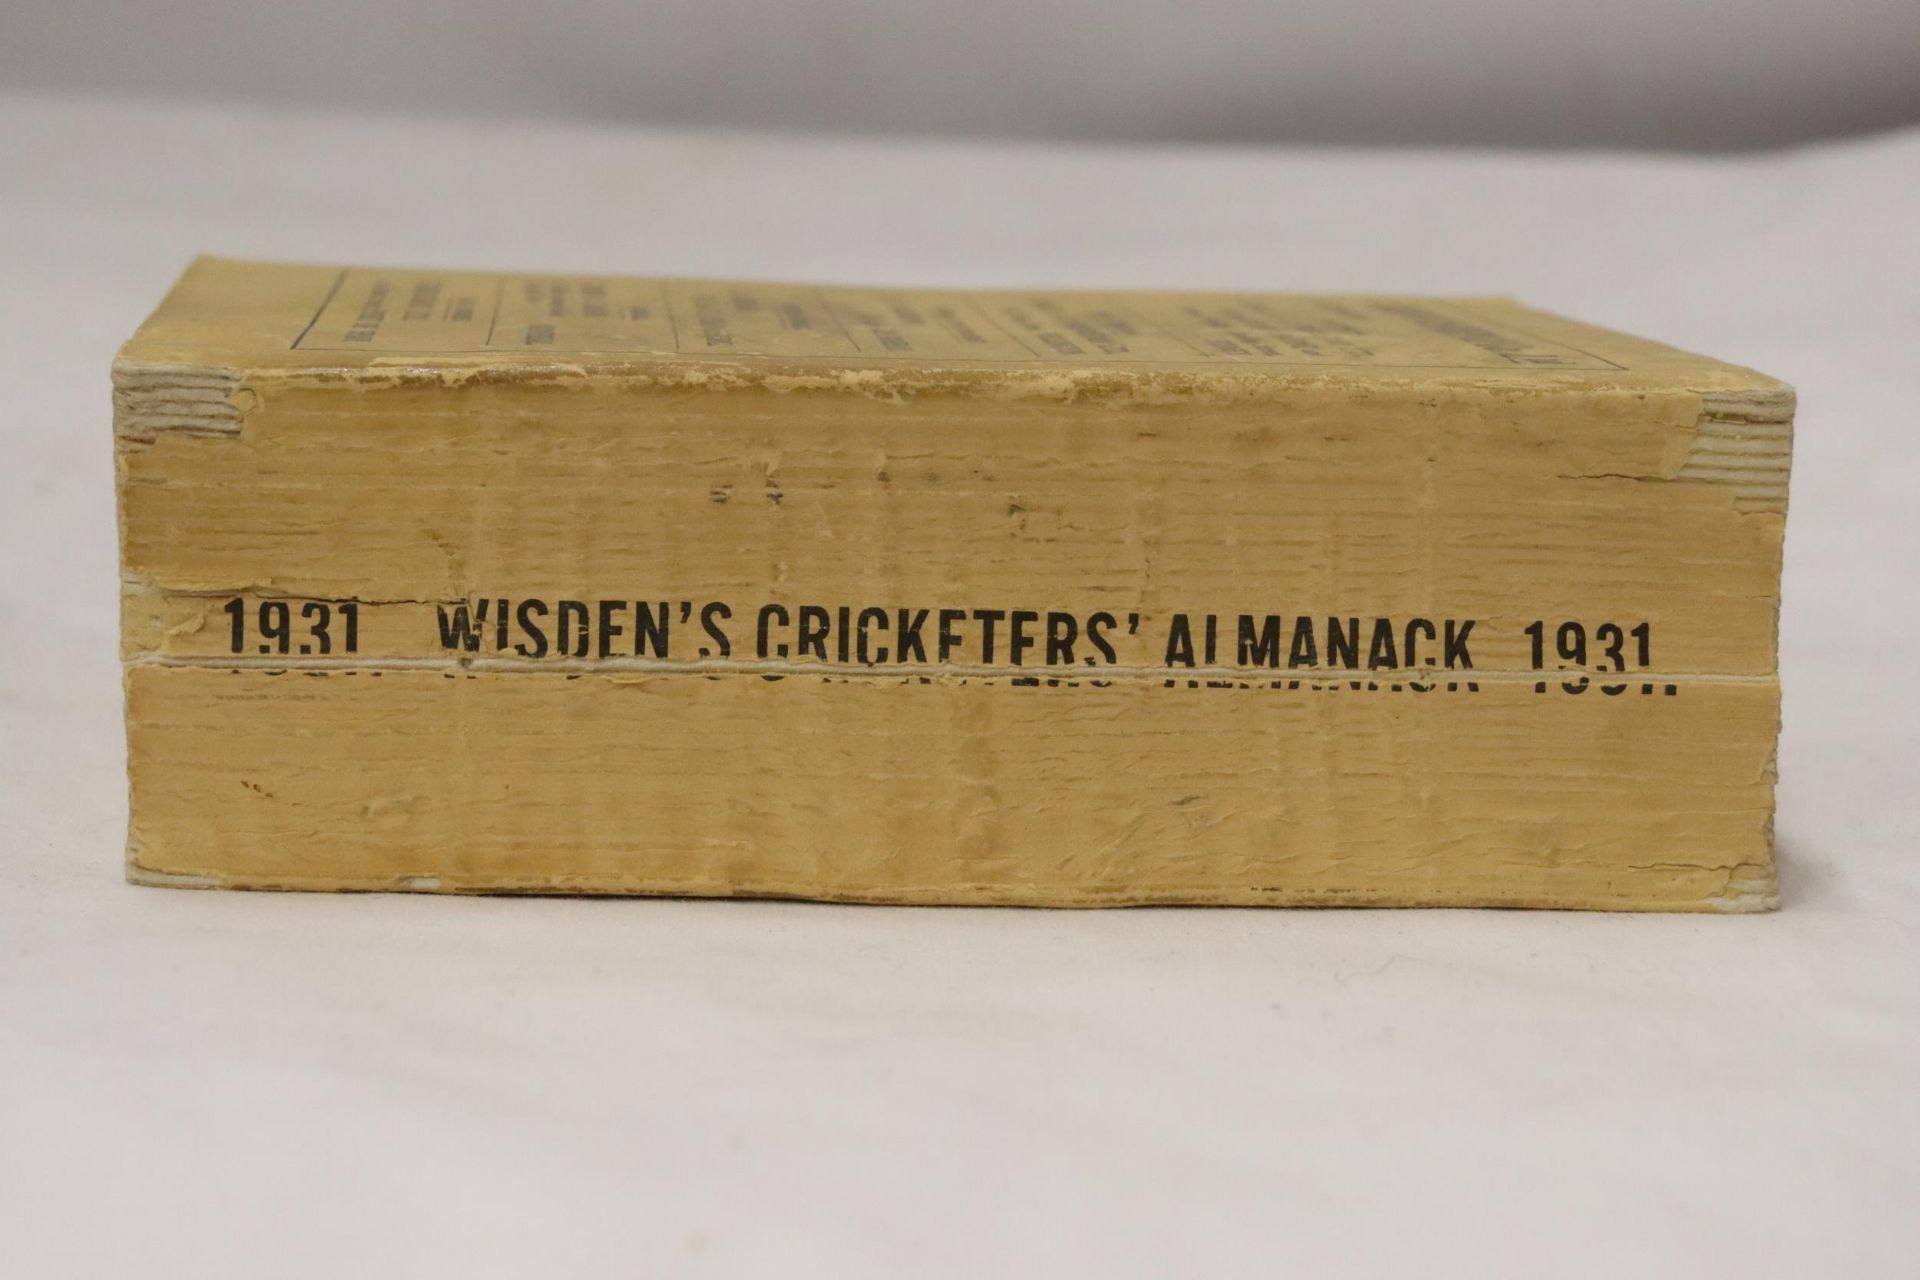 A 1931 COPY OF WISDEN'S CRICKETER'S ALMANACK. THIS COPY IS IN GOOD USED CONDITION, MISSING A SMALL - Image 2 of 4